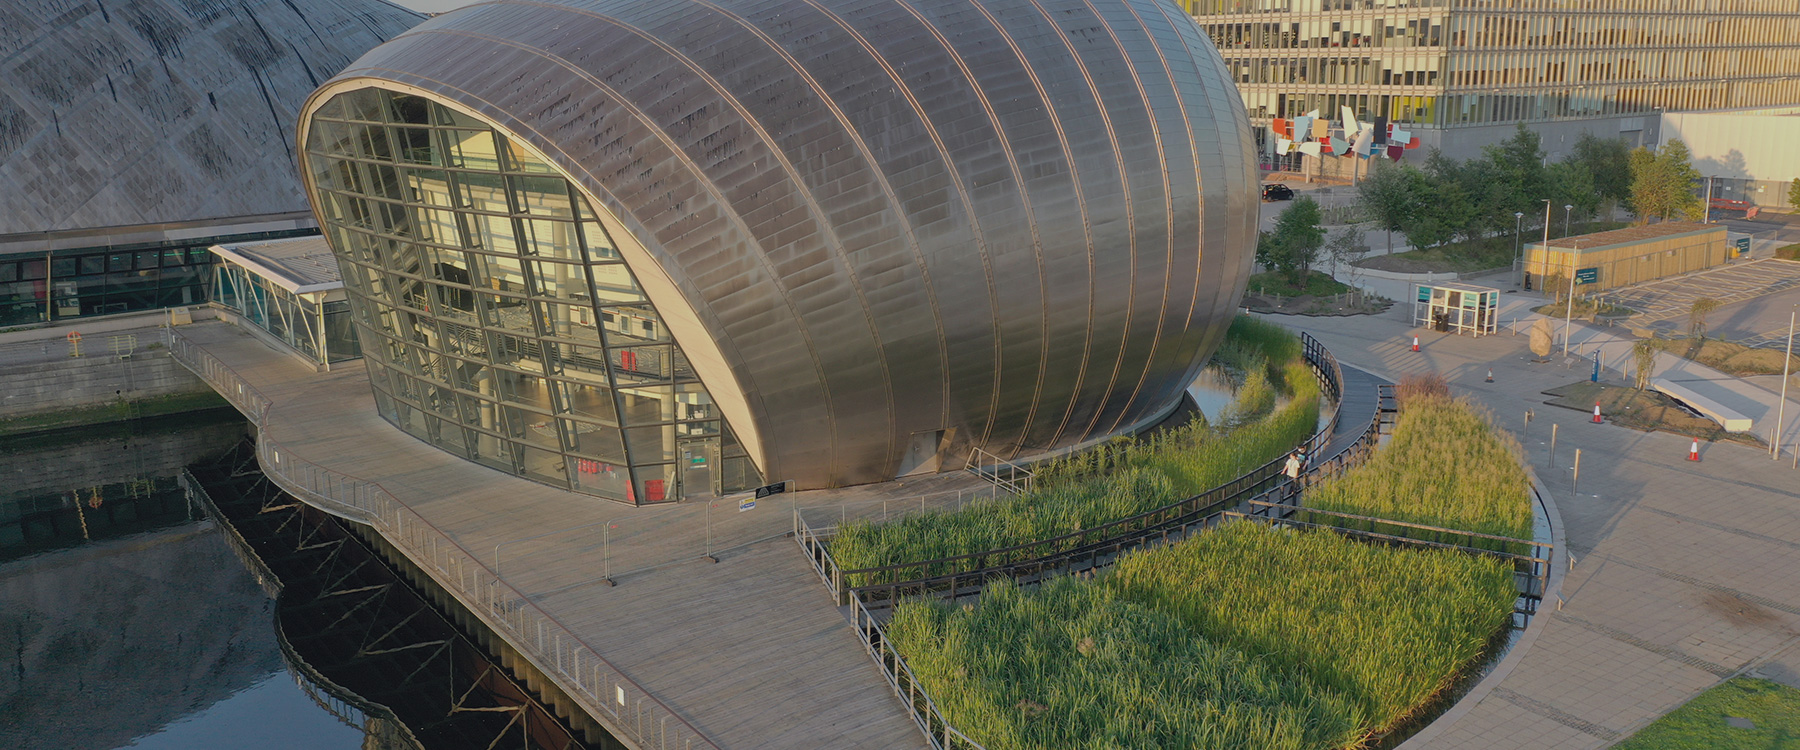 An aerial photo shows tall green plants emerging from a wetland area beside the silver building of the IMAX cinema. Image: HawkAye